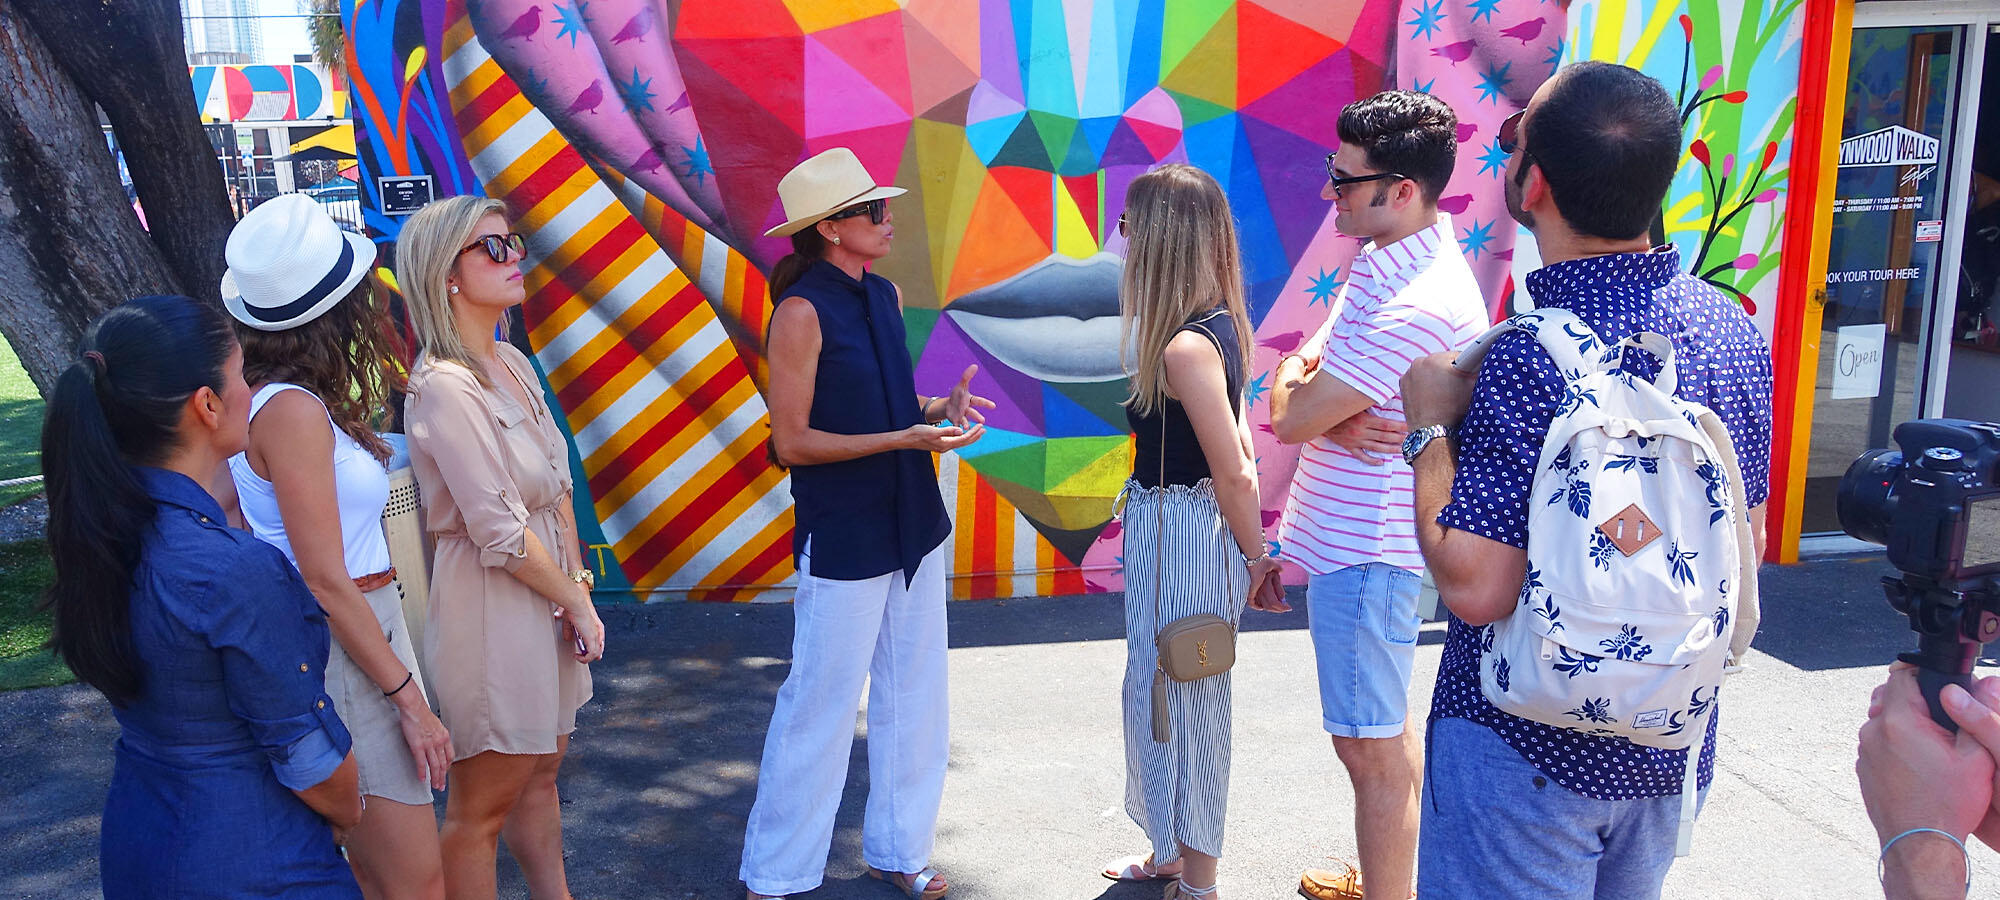 A group of people enjoying a private culinary experience in front of a colorful mural in Little Havana.